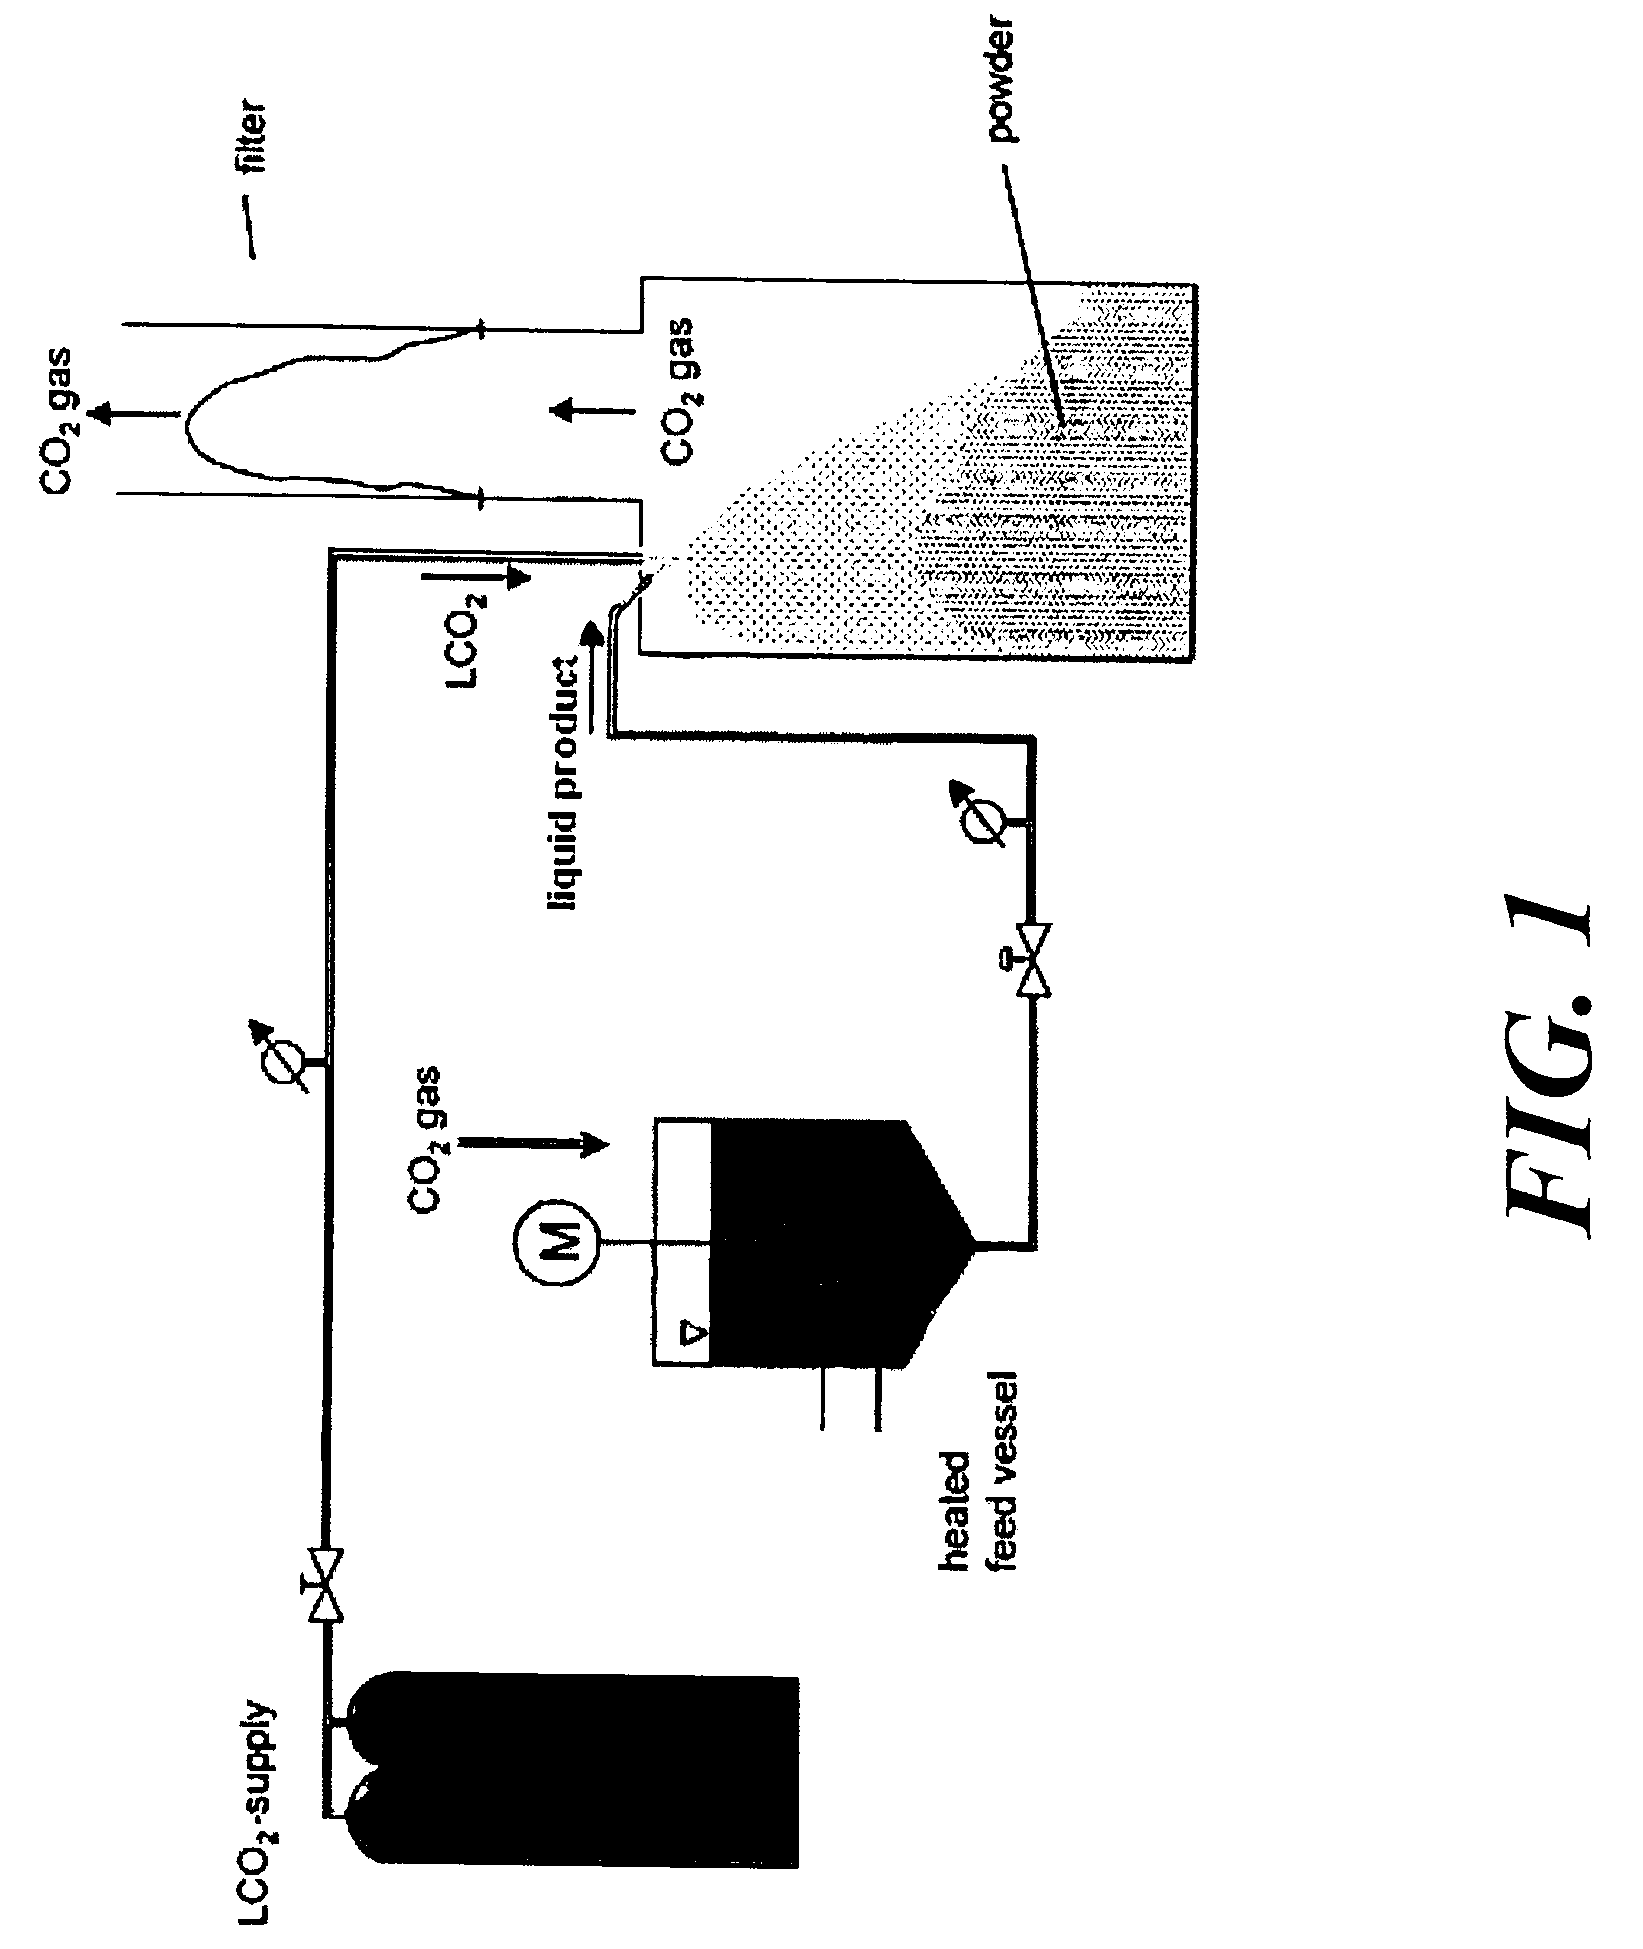 Process and apparatus for cooling and atomizing liquid or pasty-like substances